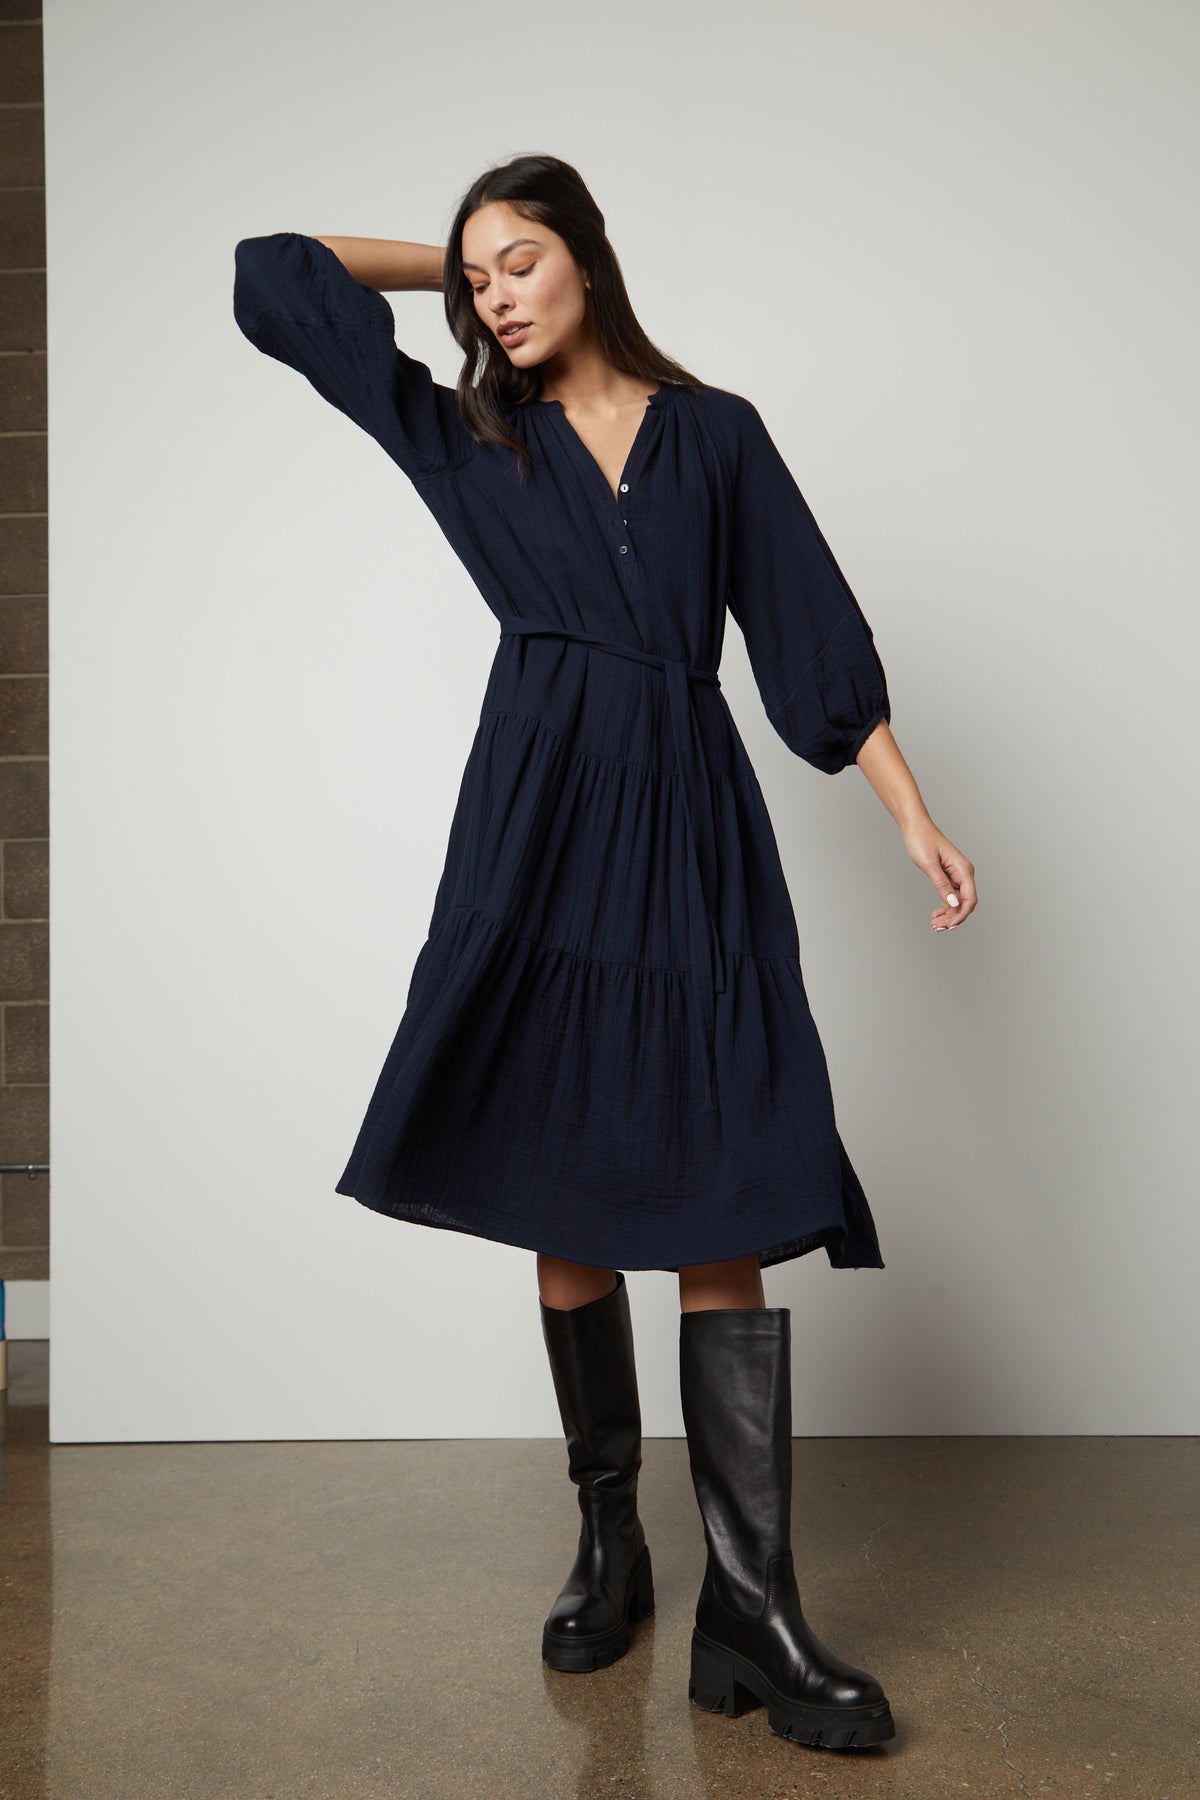 The model is wearing a Velvet by Graham & Spencer DIXON COTTON GAUZE TIERED DRESS and black boots.-26737006248129